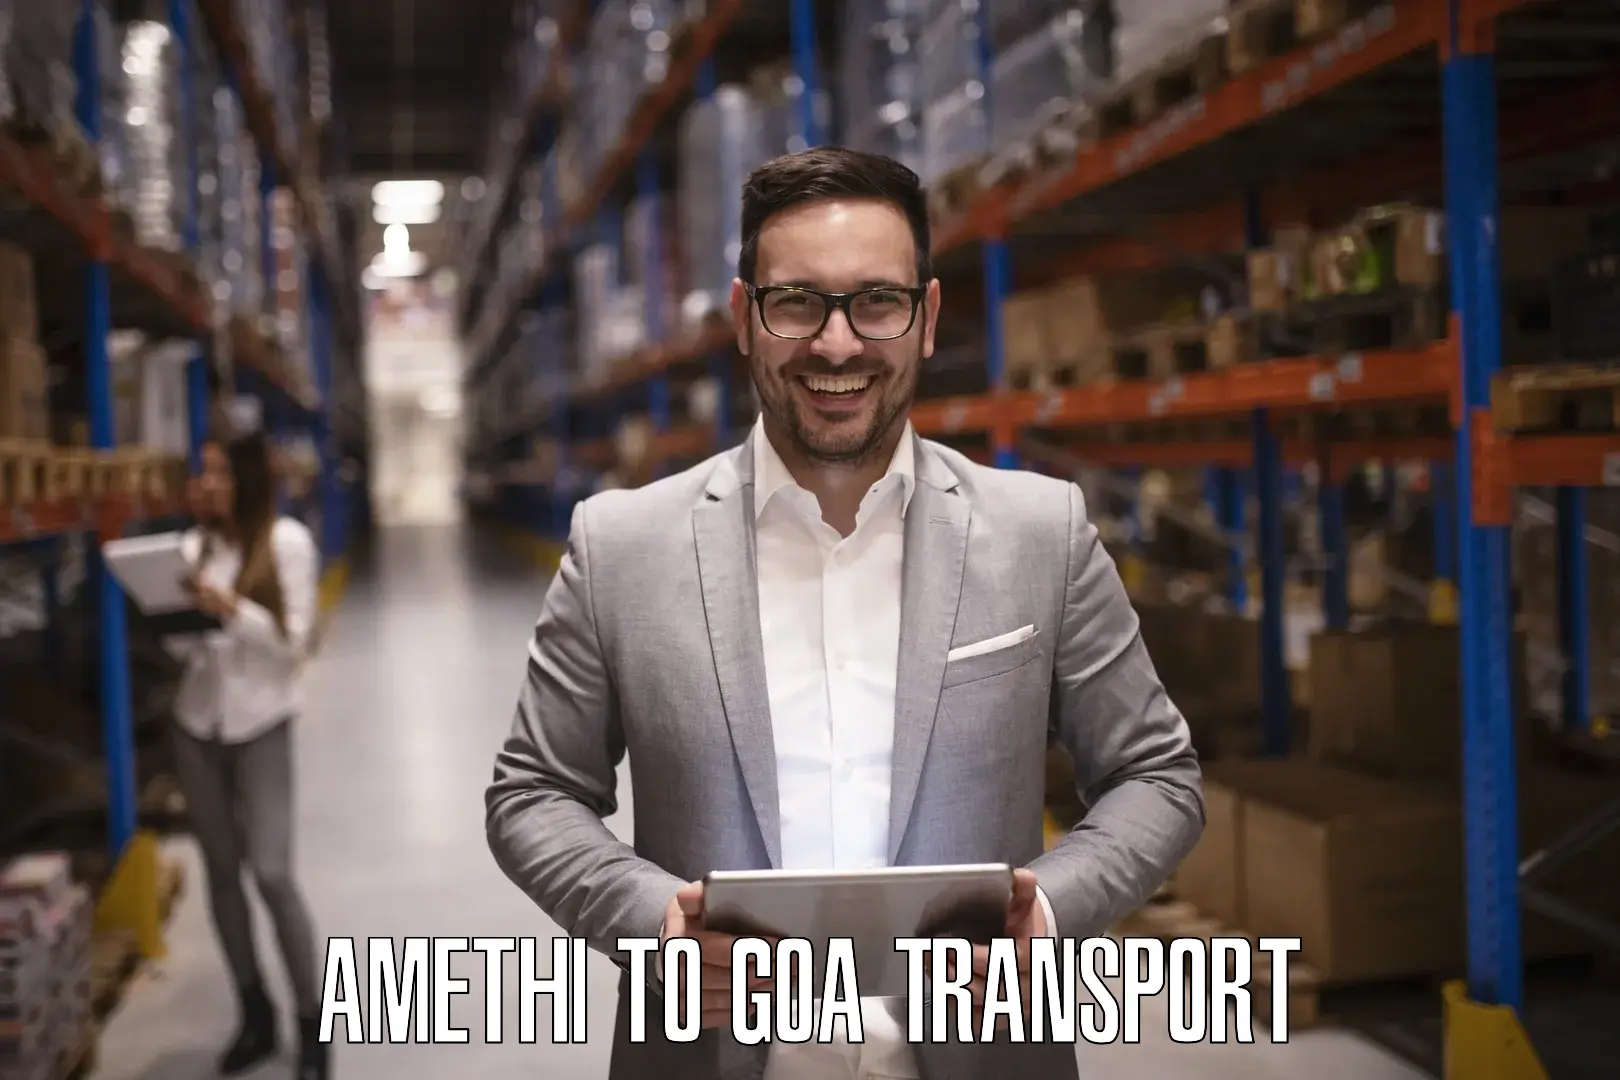 Nationwide transport services Amethi to Goa